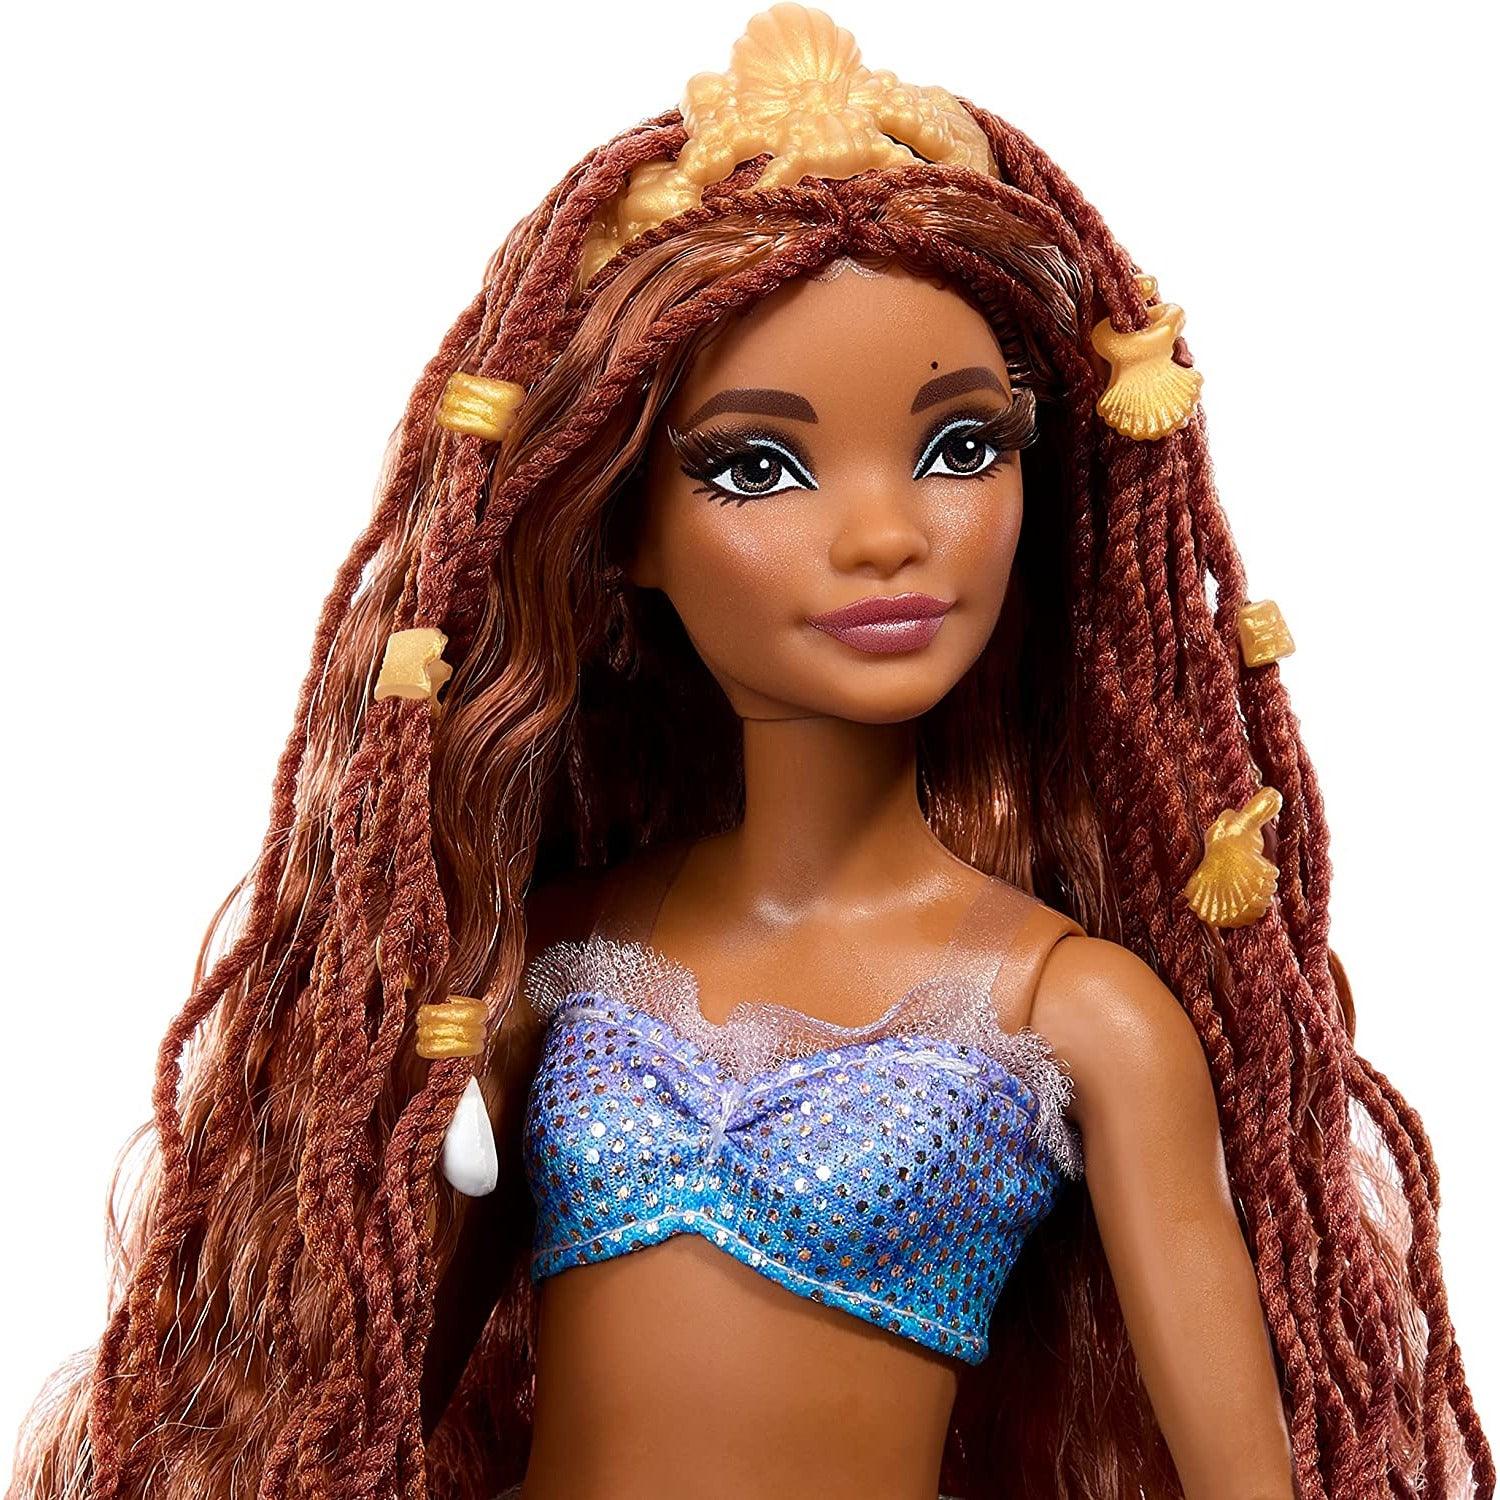 Mattel Disney The Little Mermaid Deluxe Mermaid Ariel Doll with Iridescent Tail, Hair Jewelry Beads, and Doll Stand - BumbleToys - 5-7 Years, Boys, Disney Princess, dup-review-publication, Fashion Dolls & Accessories, Girls, Mattel, Pre-Order